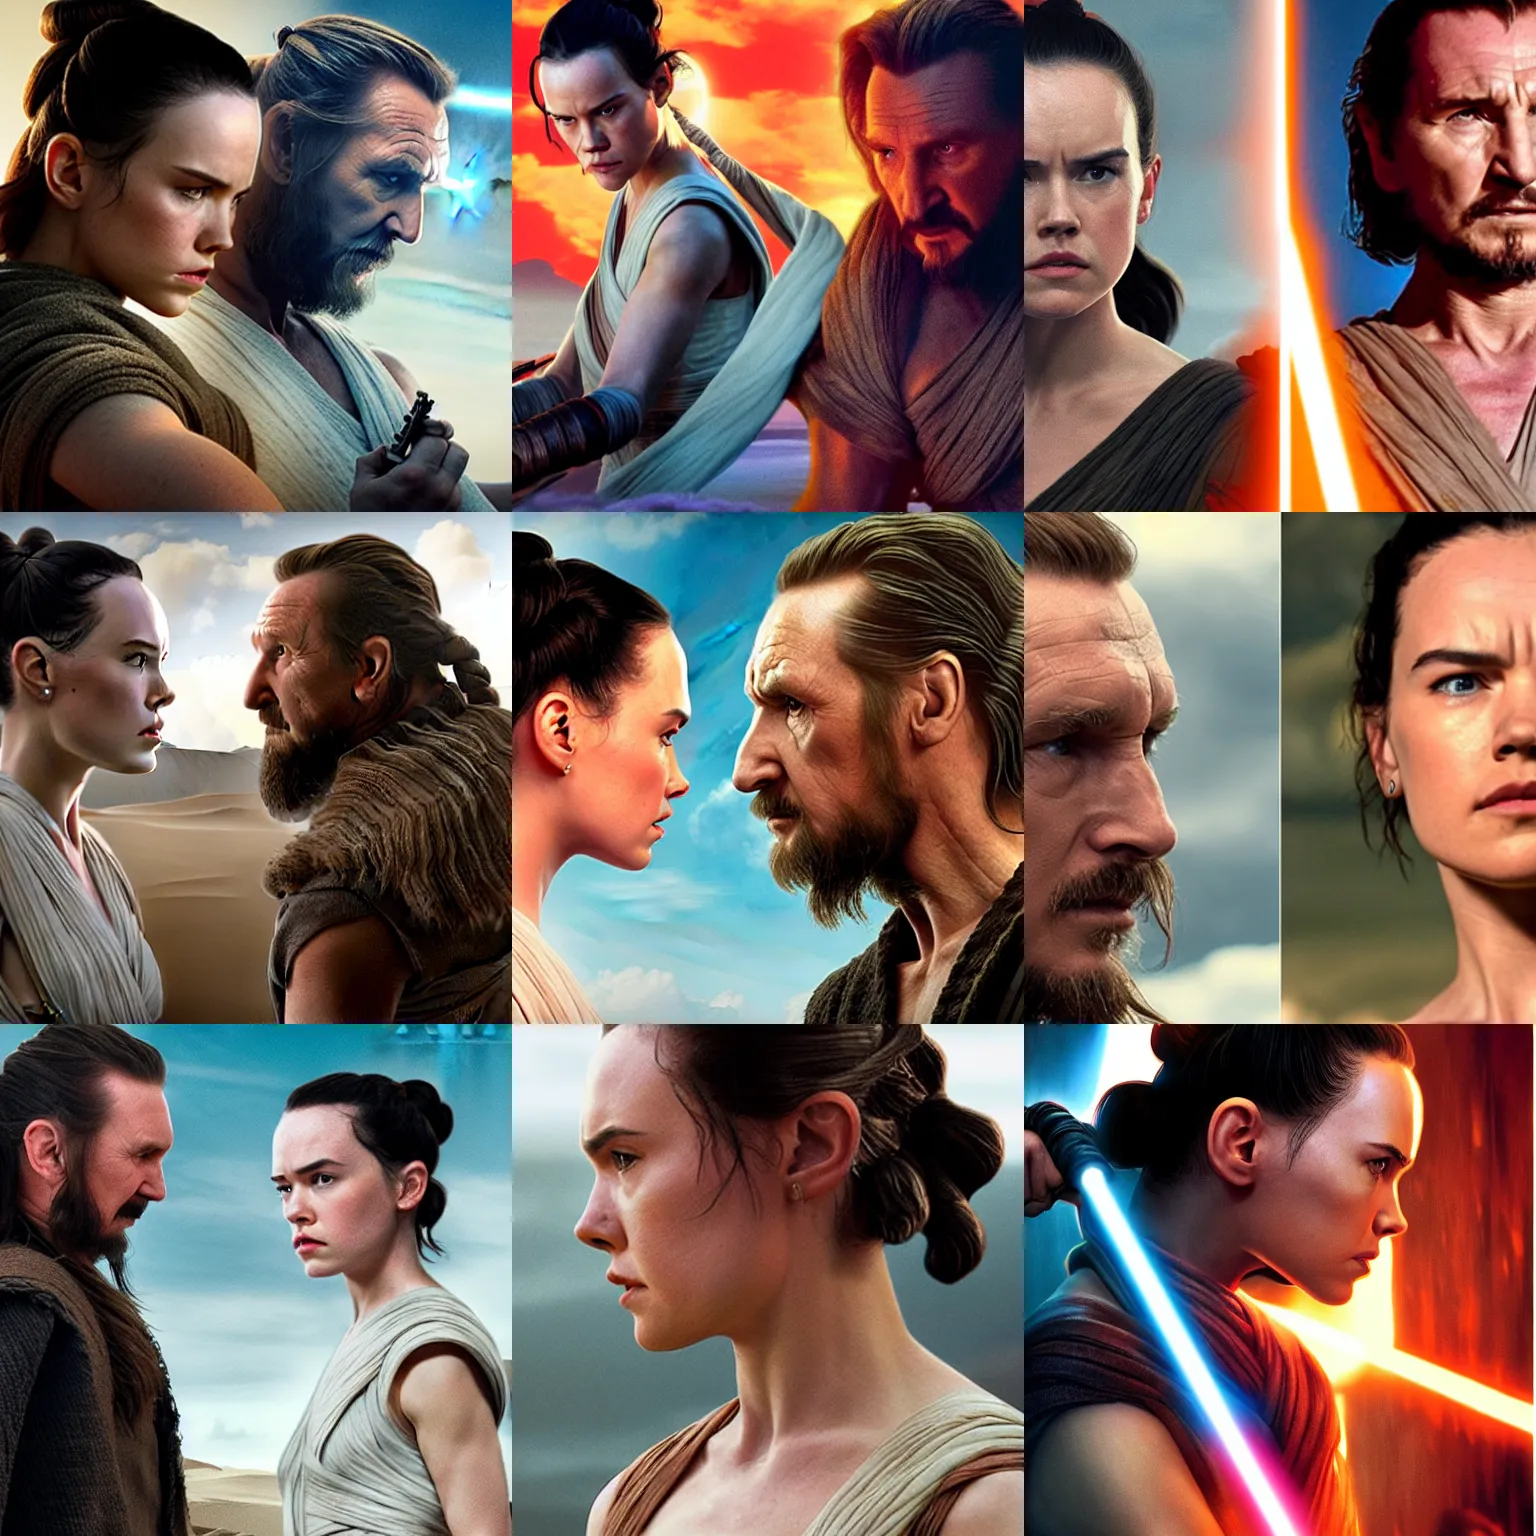 Prompt: side view of daisy ridley as rey, facing liam neeson as qui - gon, scifi movie poster